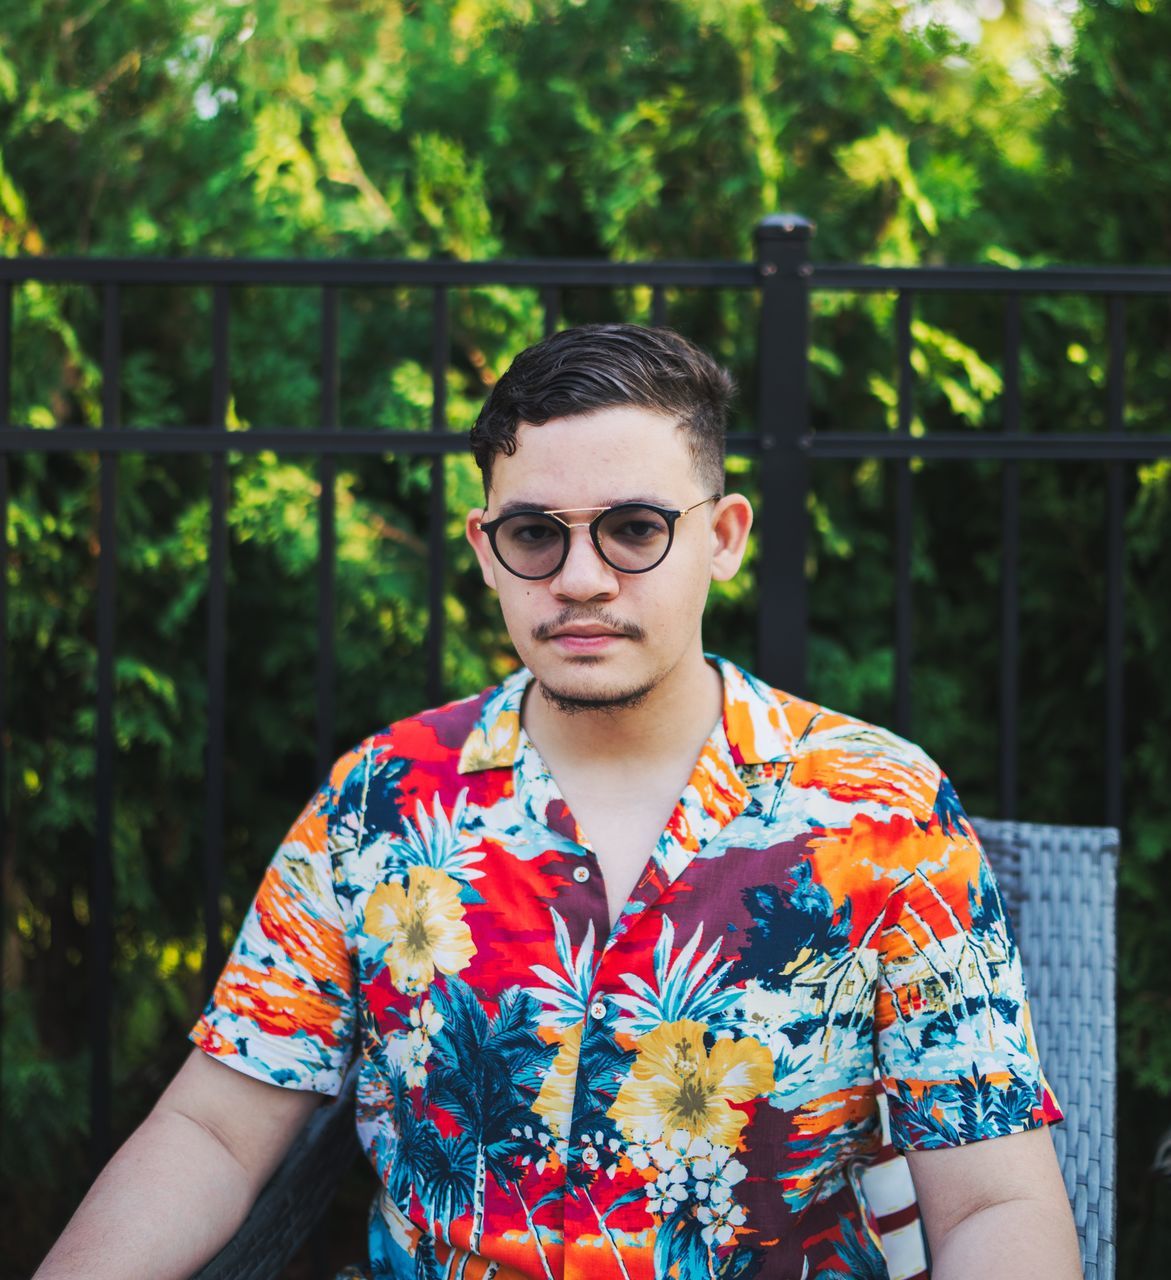 front view, one person, portrait, real people, glasses, young adult, leisure activity, lifestyles, young men, casual clothing, looking at camera, standing, fashion, focus on foreground, waist up, day, pattern, plant, outdoors, floral pattern